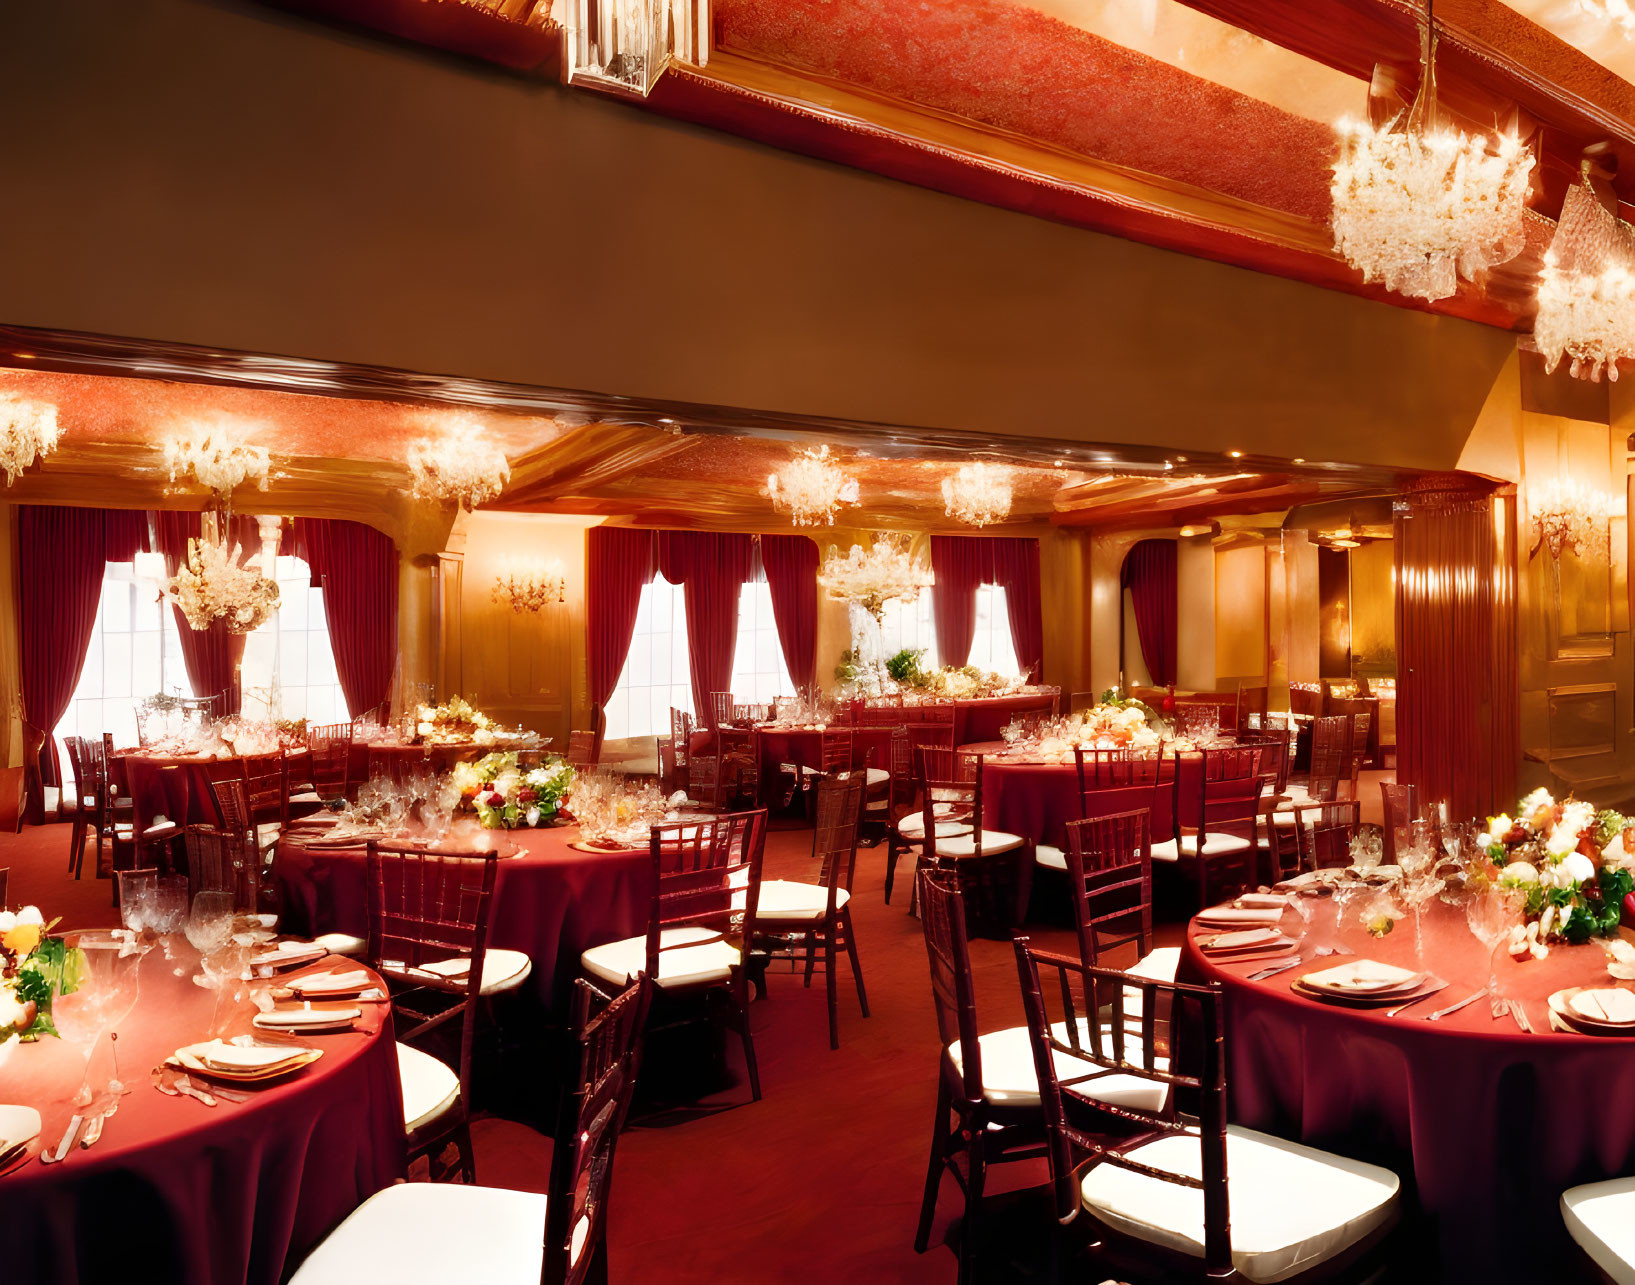 Luxurious Dining Room with Red Curtains, Chandeliers, and Fine China